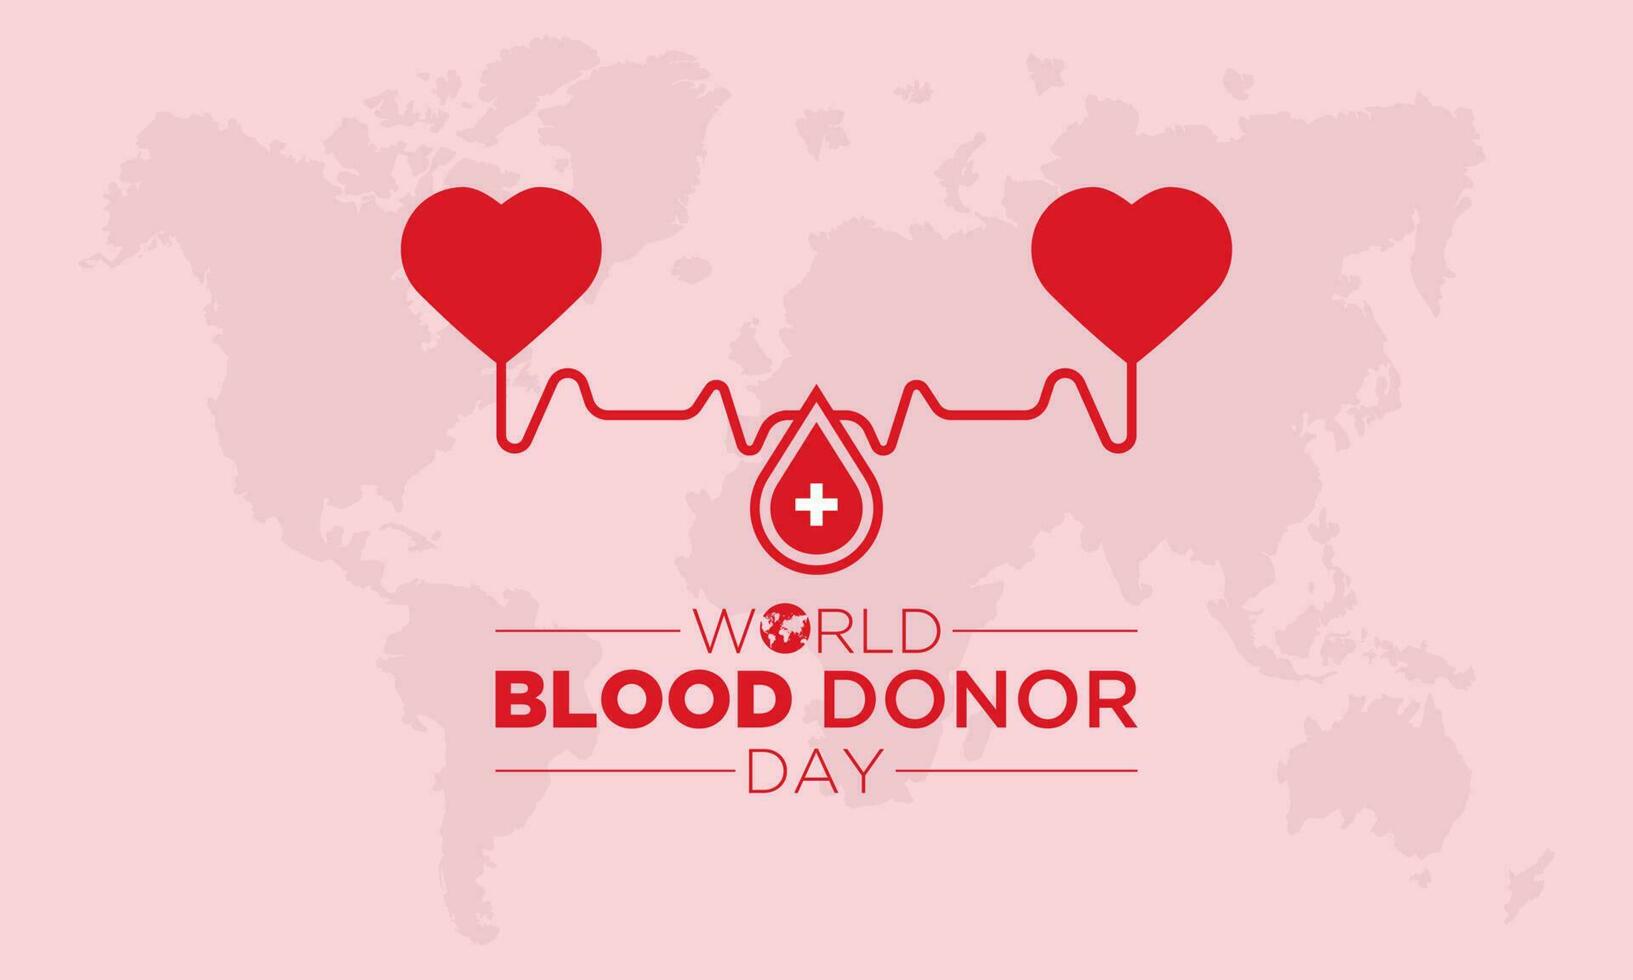 World blood donor day is observed every year in june 14. Donate blood concept illustration background for world blood donor day. Vector illustration.